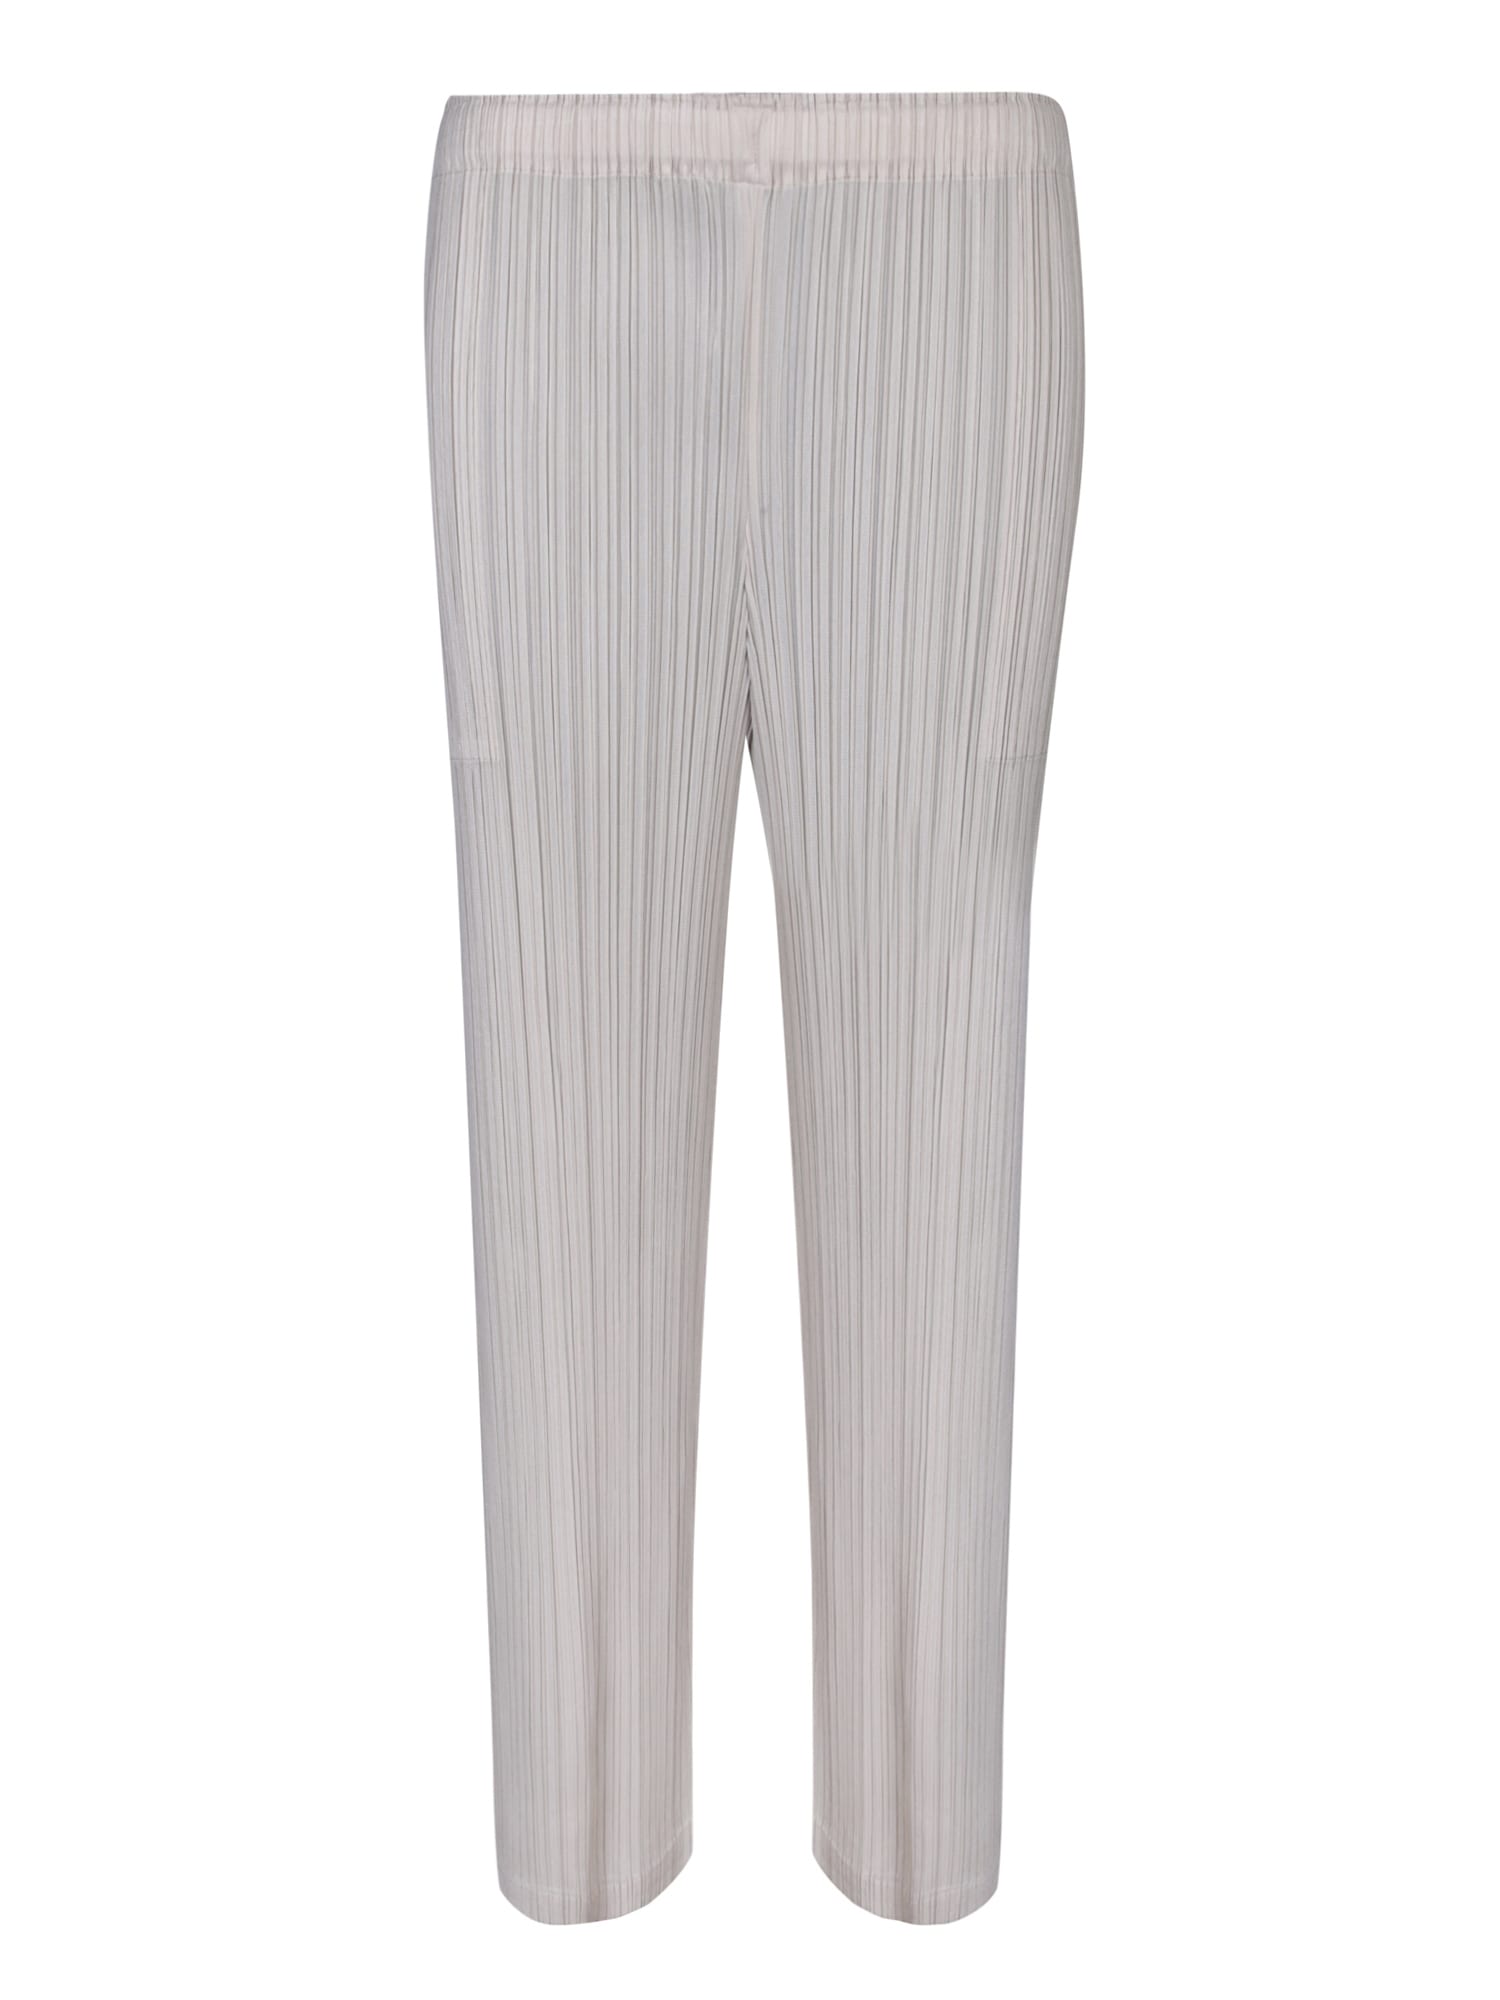 Issey Miyake Pleats Please Ivory Straight Trousers